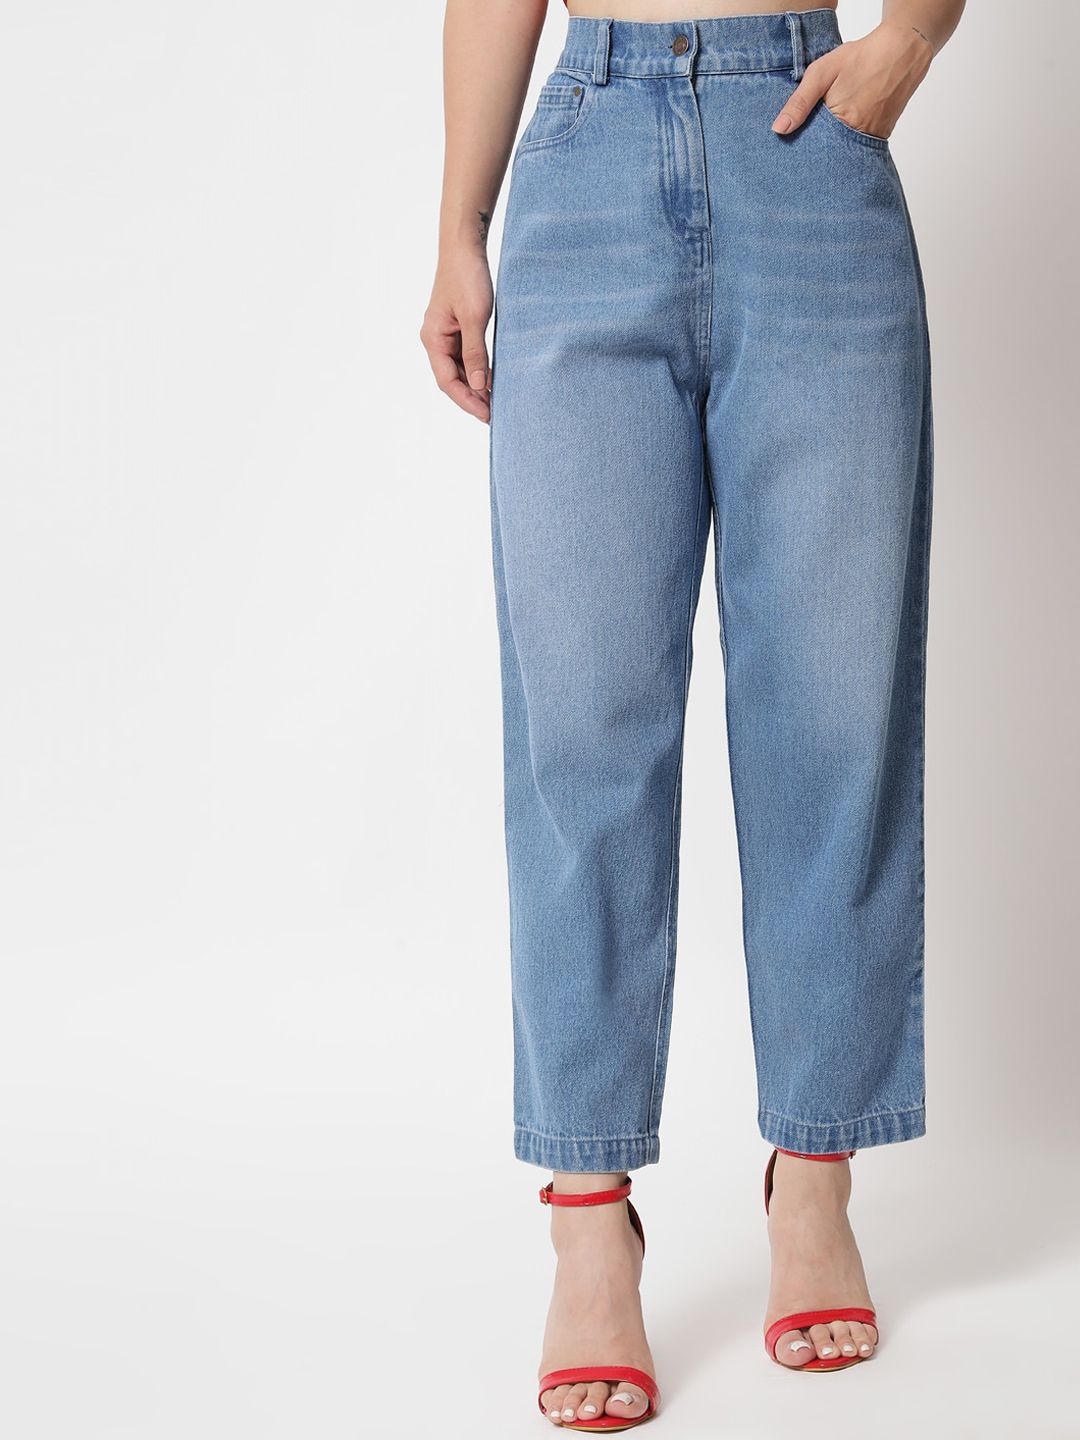 Orchid Blues Women Blue High-Rise Jeans Price in India